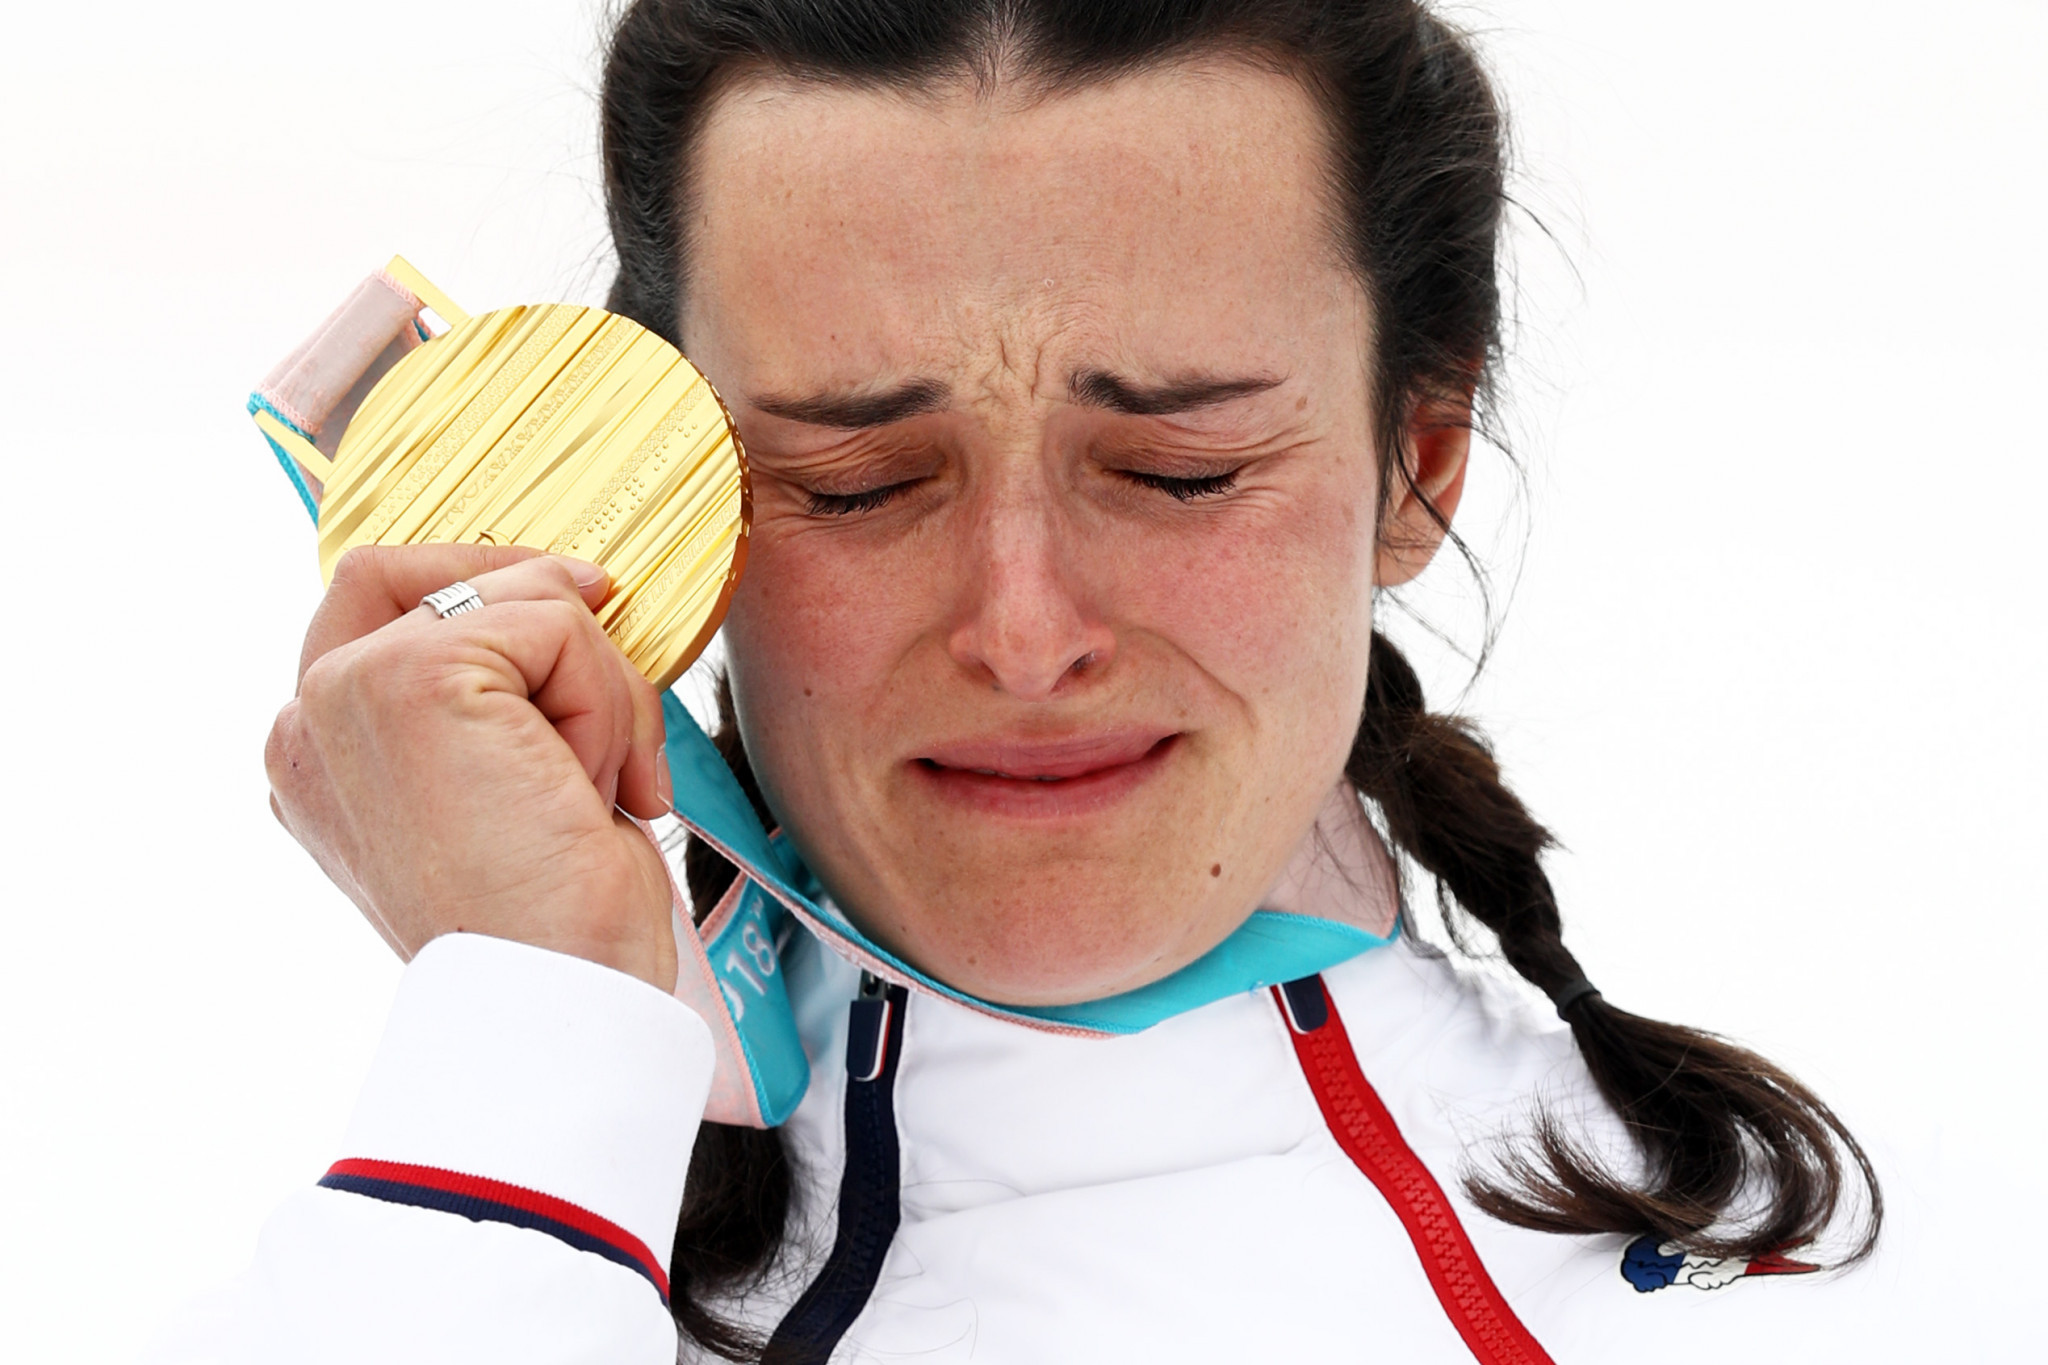 France's Marie Bochet struggles to contain her emotions after winning her fourth gold medal of the Games ©Getty Images